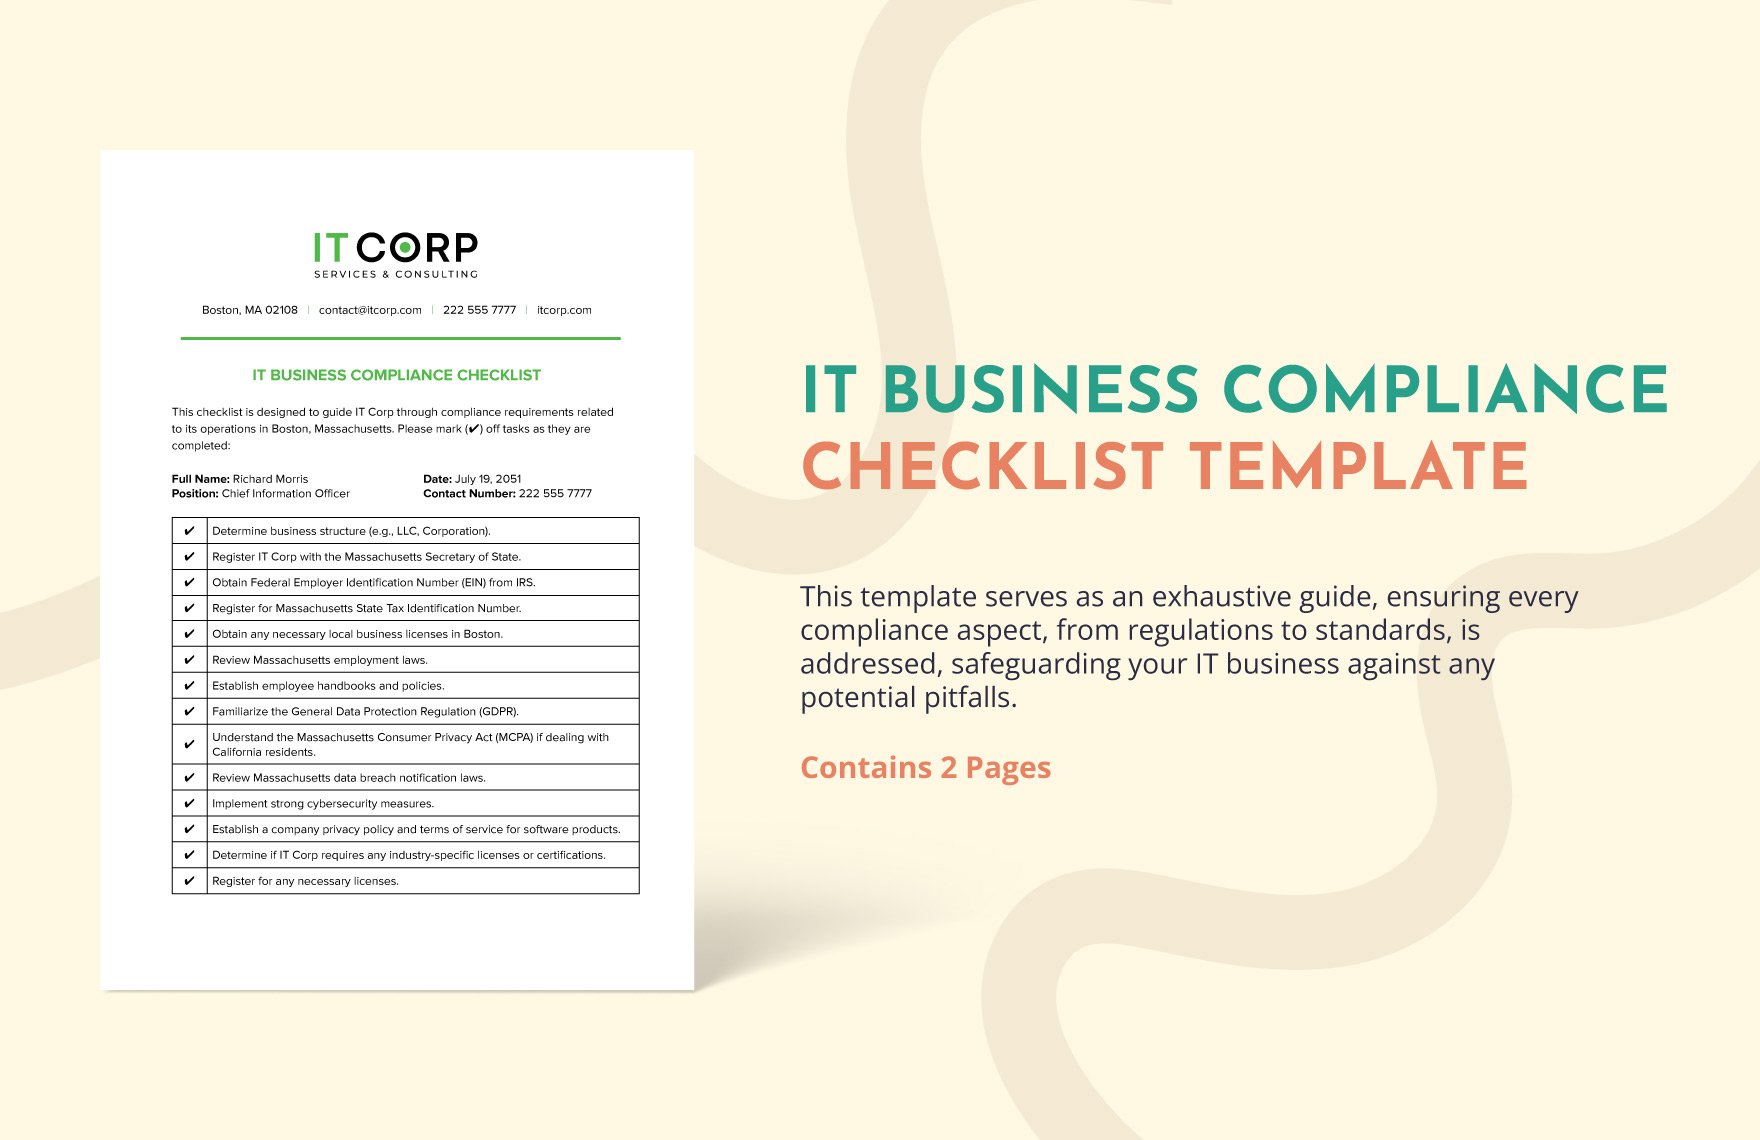 IT Business Compliance Checklist Template in Word, Google Docs, PDF